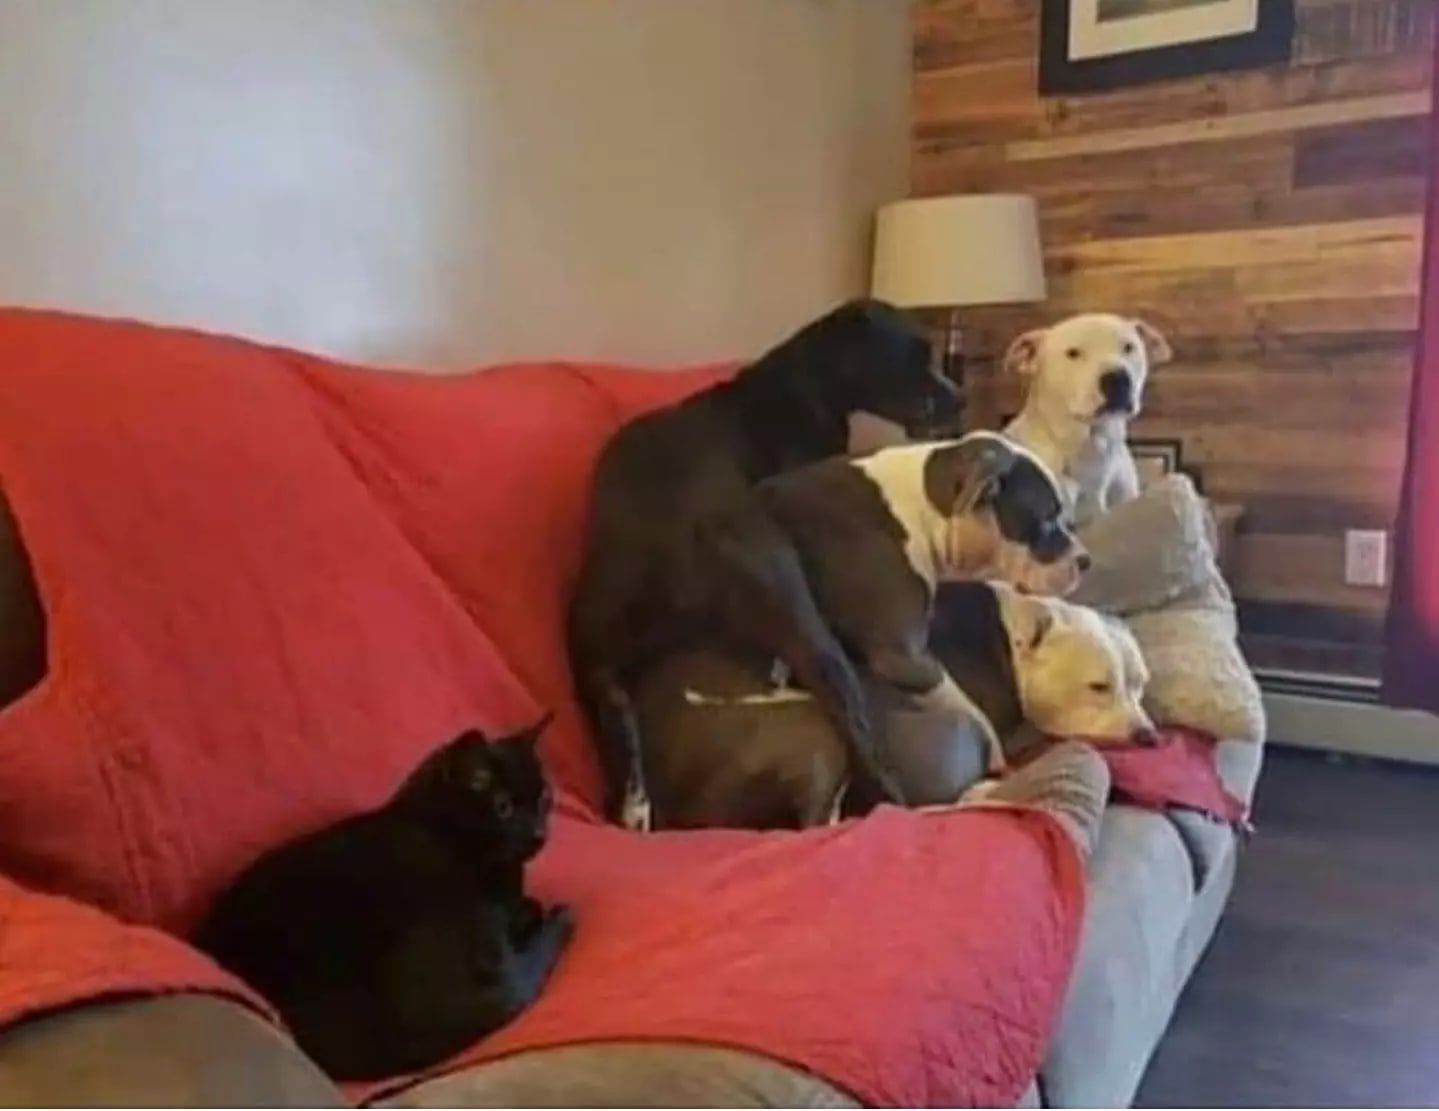 Big bad pitbulls scared to sit next to the cat!